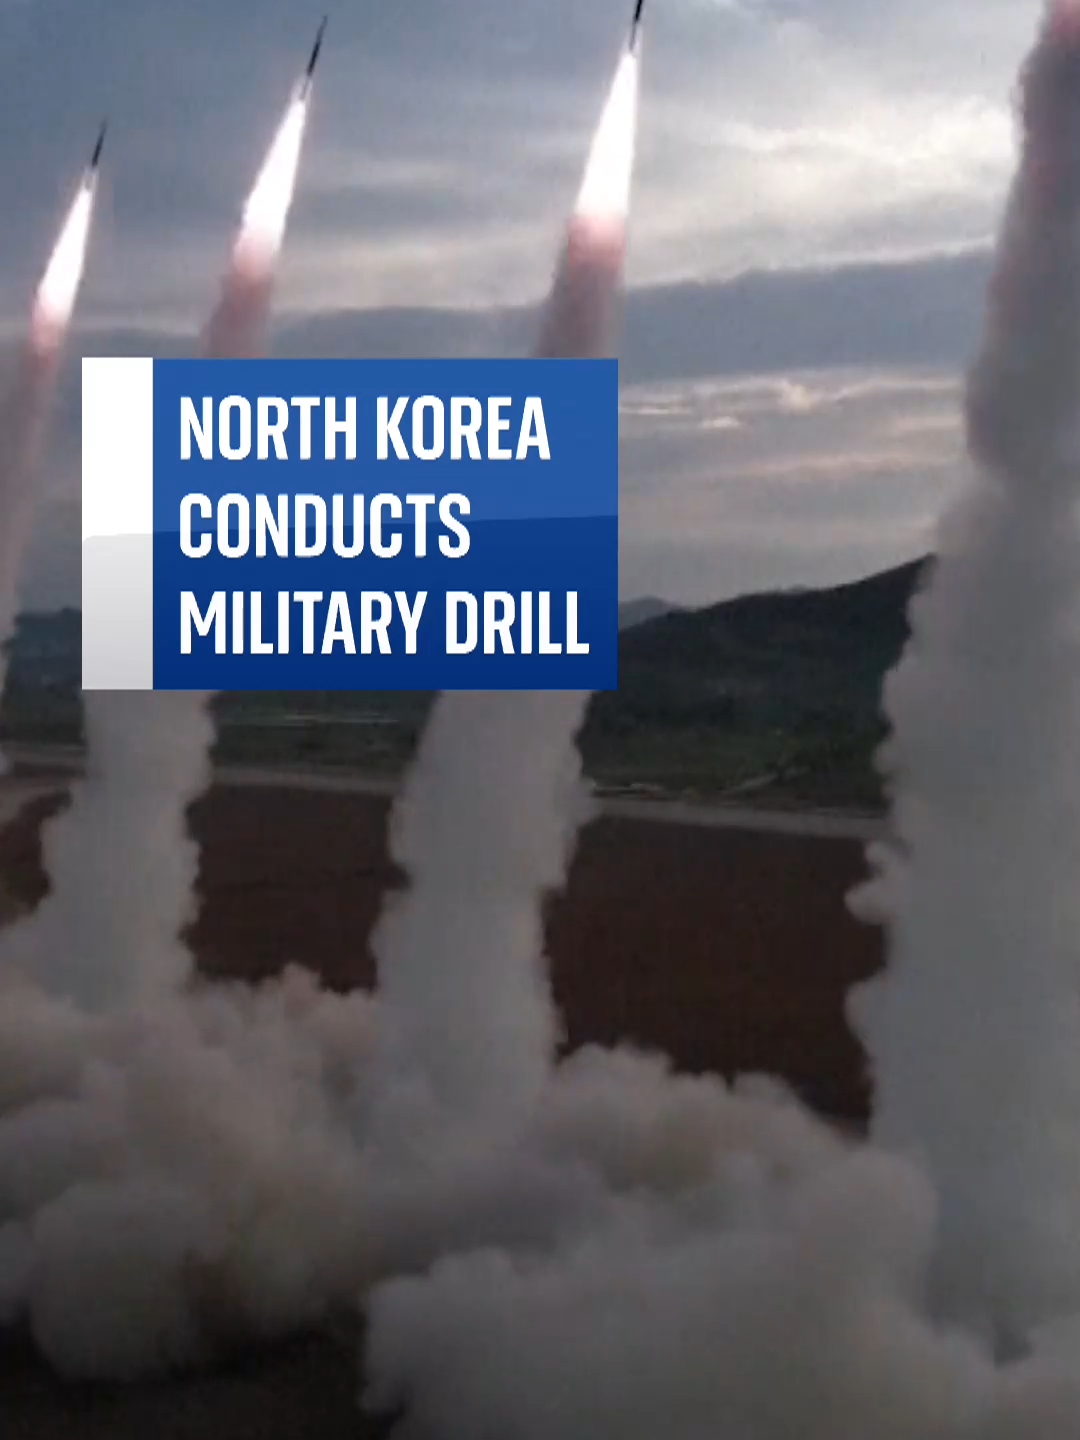 North Korea's state media released footage showing drills involving nuclear-capable, multiple rocket launchers. #northkorea🇰🇵 #rocket #missile #nuclear #military